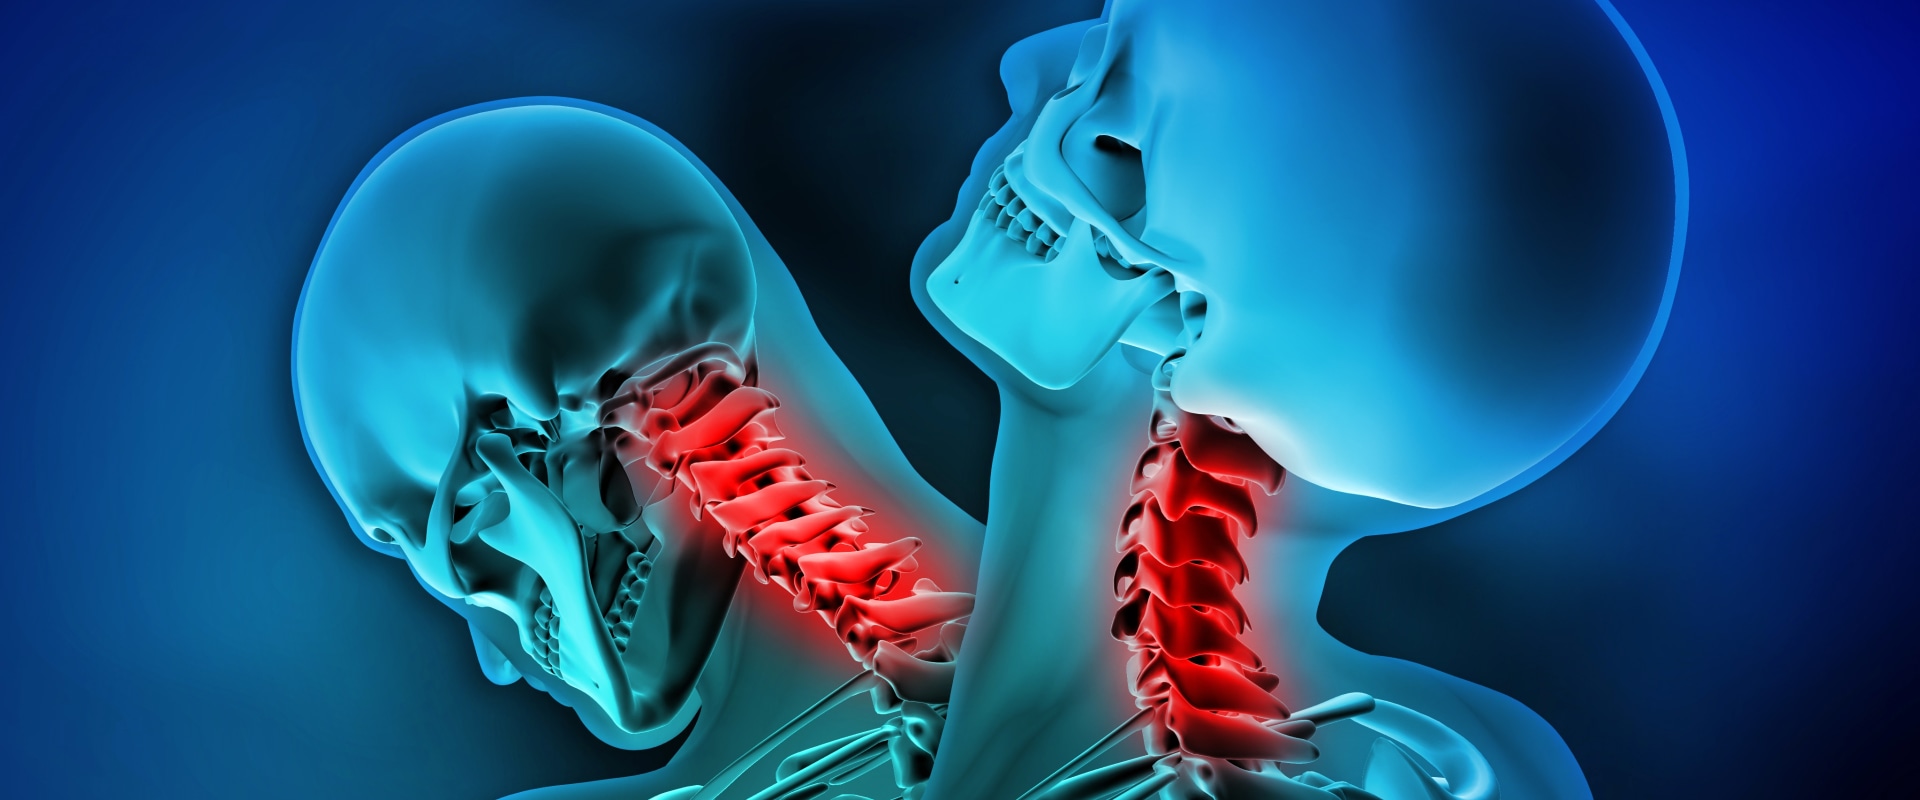 Is chiropractic good for whiplash injury?